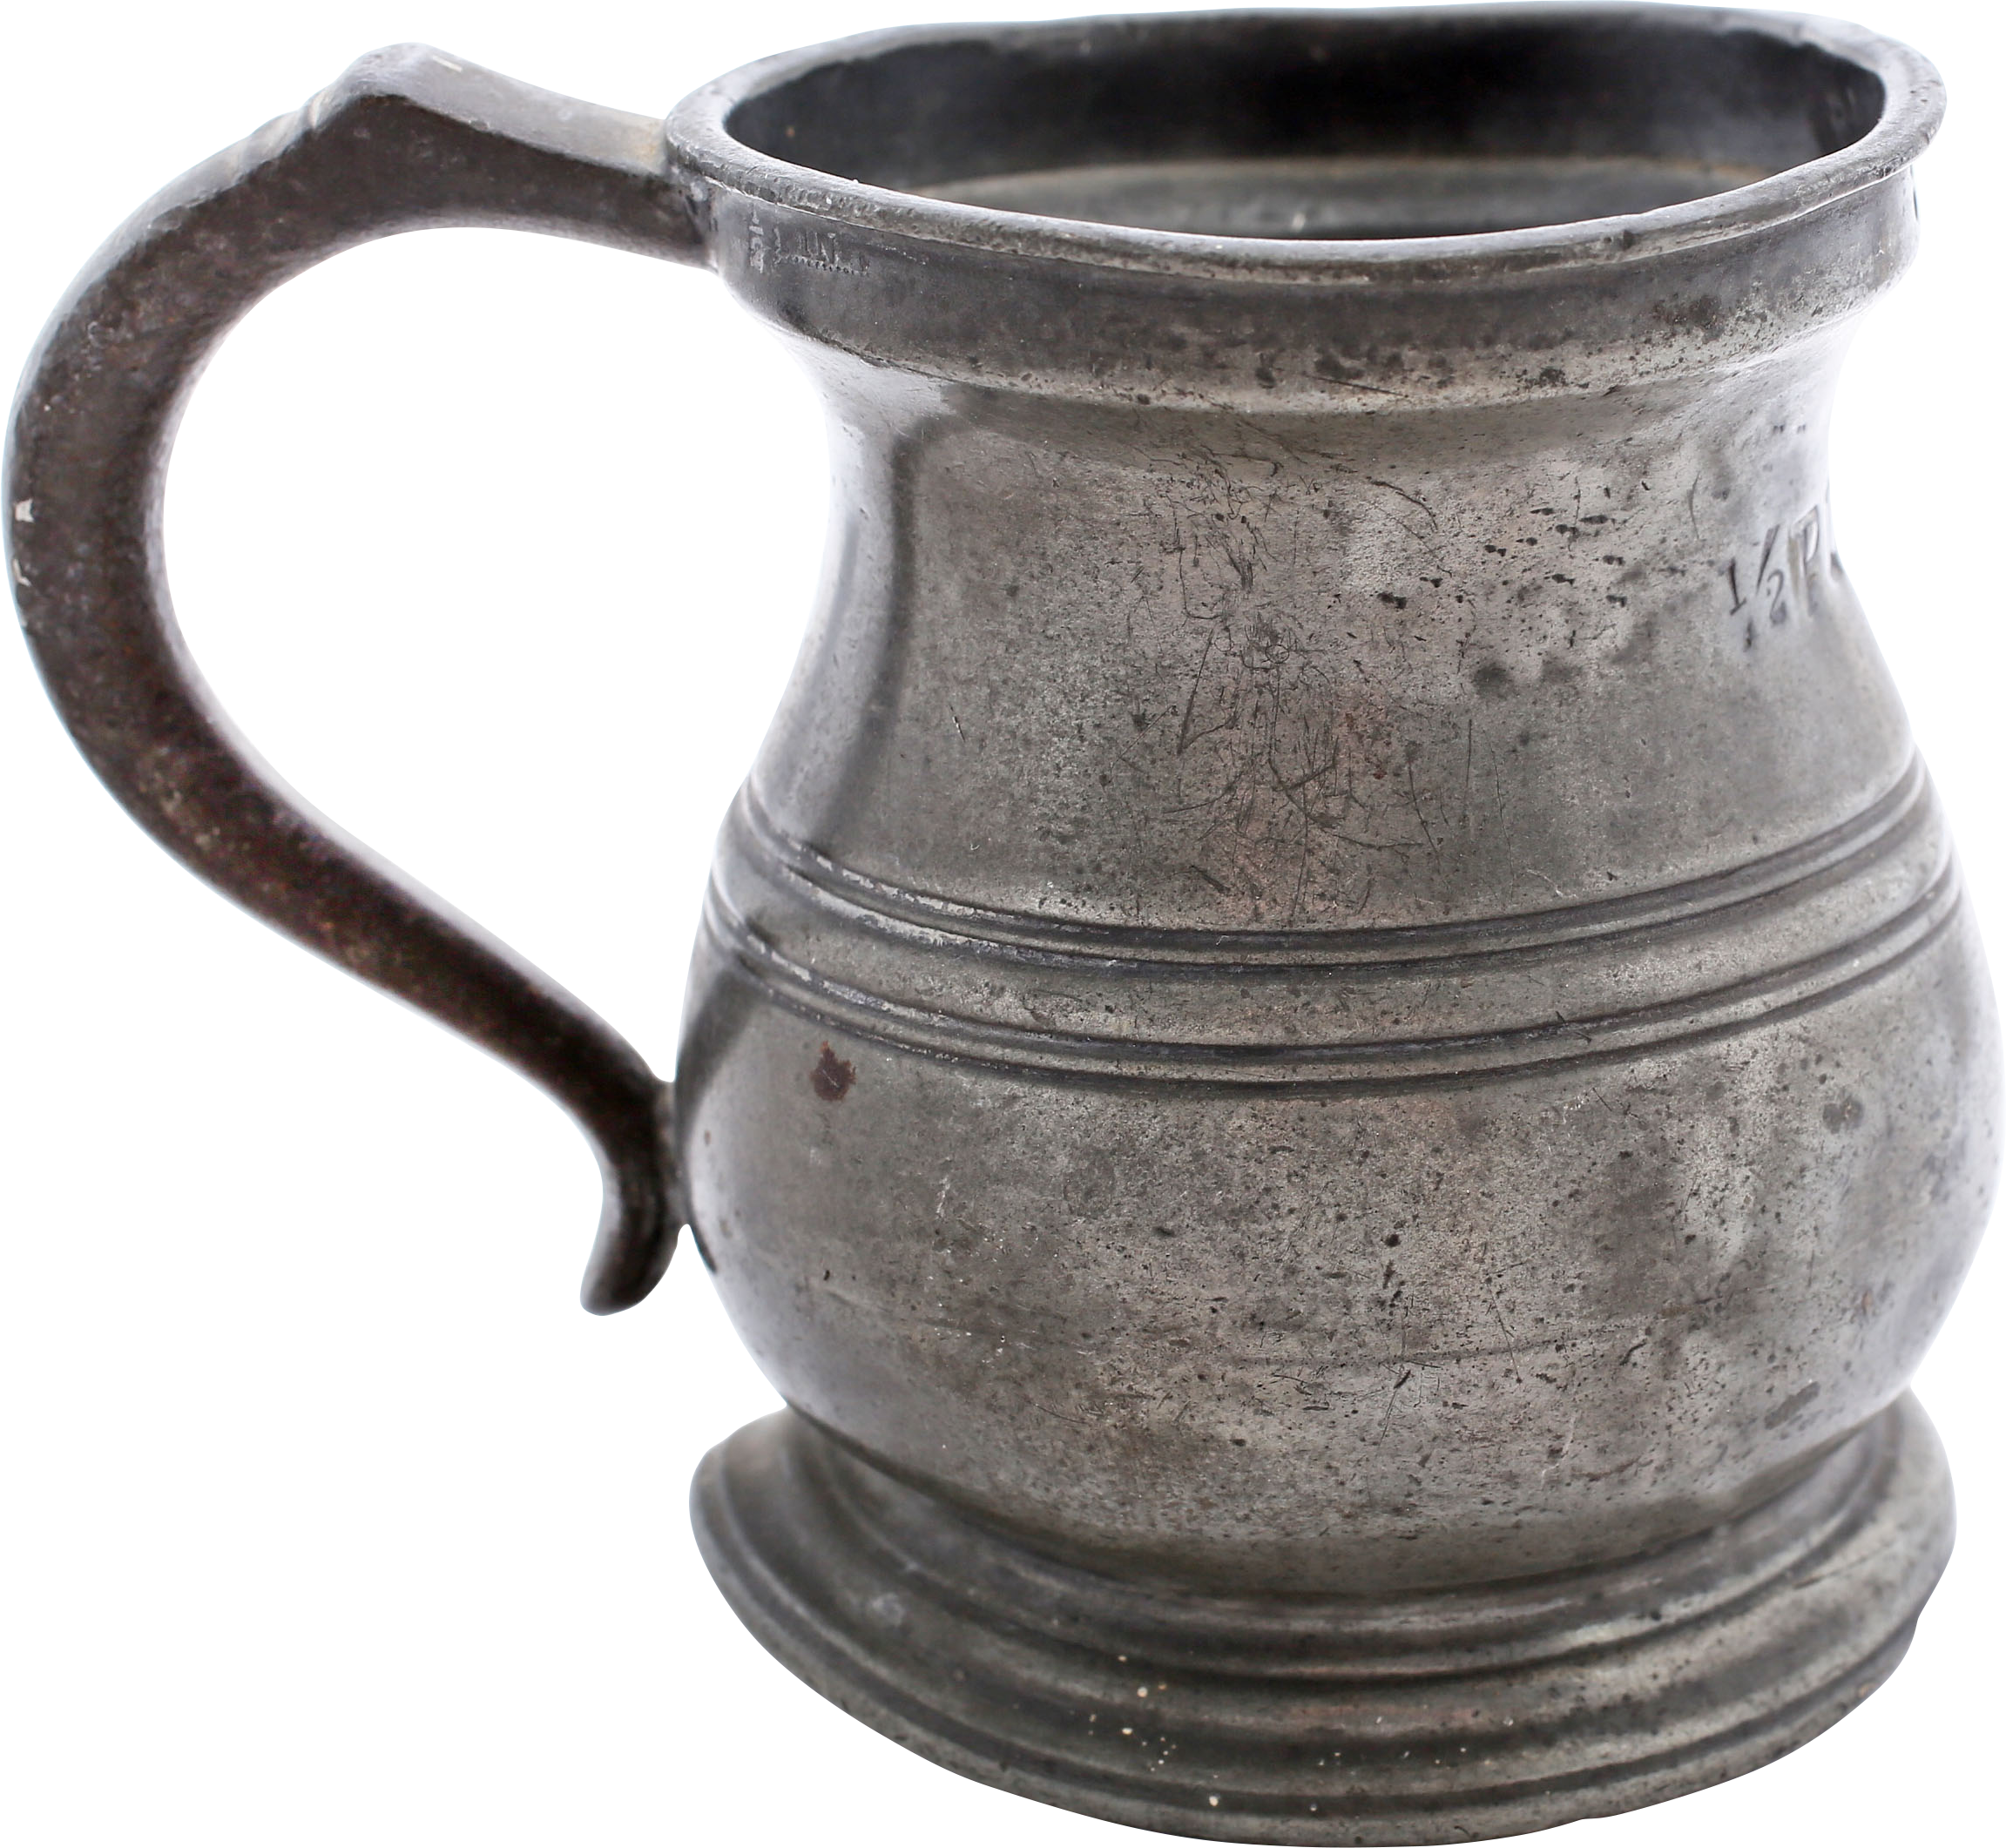 CHARMING VICTORIAN PEWTER PUB MUG, FROM THE MOVIES! - Fagan Arms